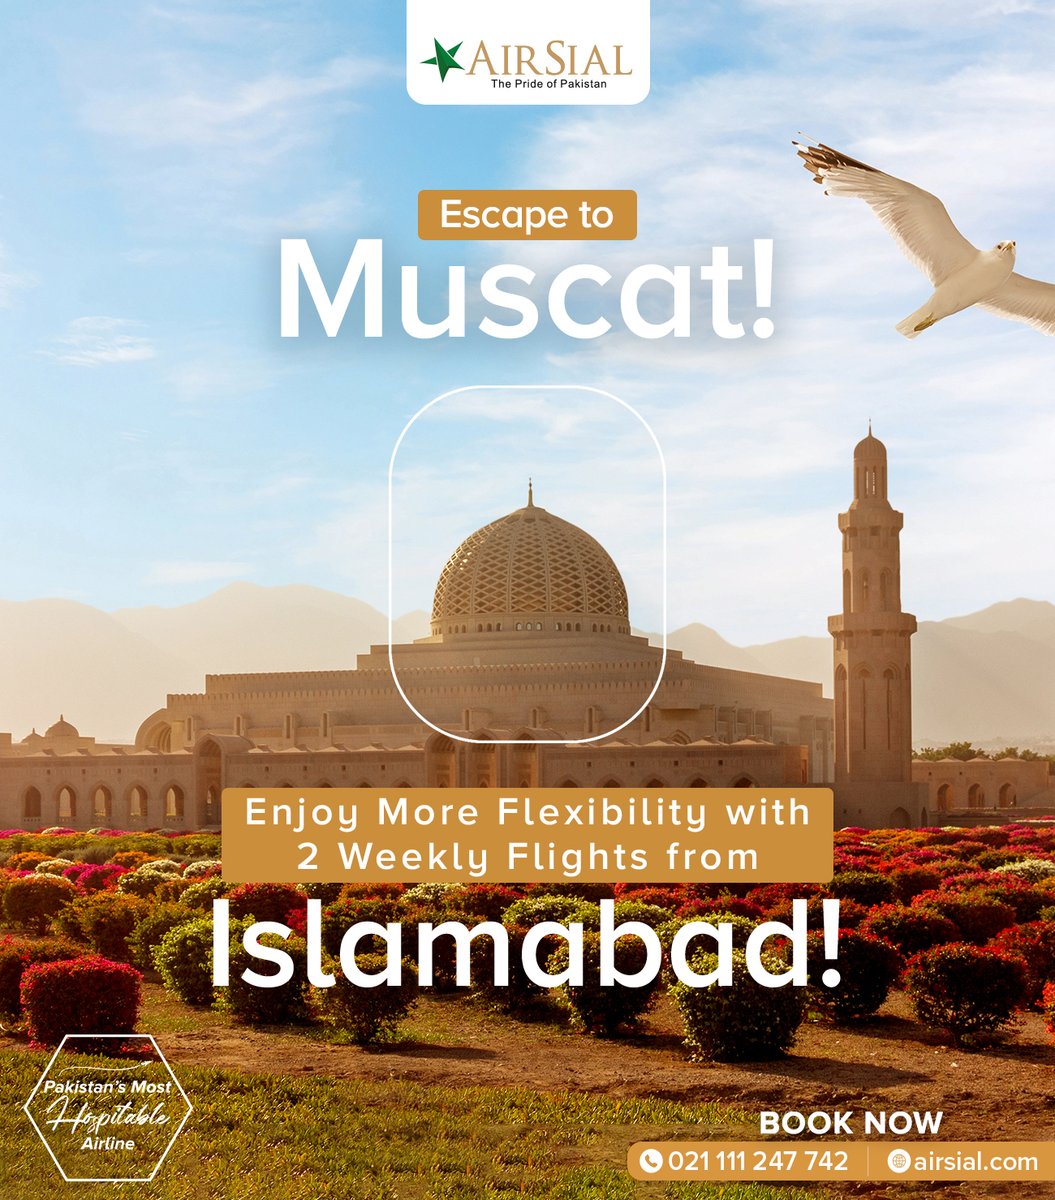 Escape to #Muscat with AirSial ✈️🇴🇲

Launching 2 Weekly Flights between #Islamabad-Muscat-Islamabad from 8th June onwards.

Book your ticket now!

#AirSial - The Pride of #Pakistan #PakistansMostHospitableAirline